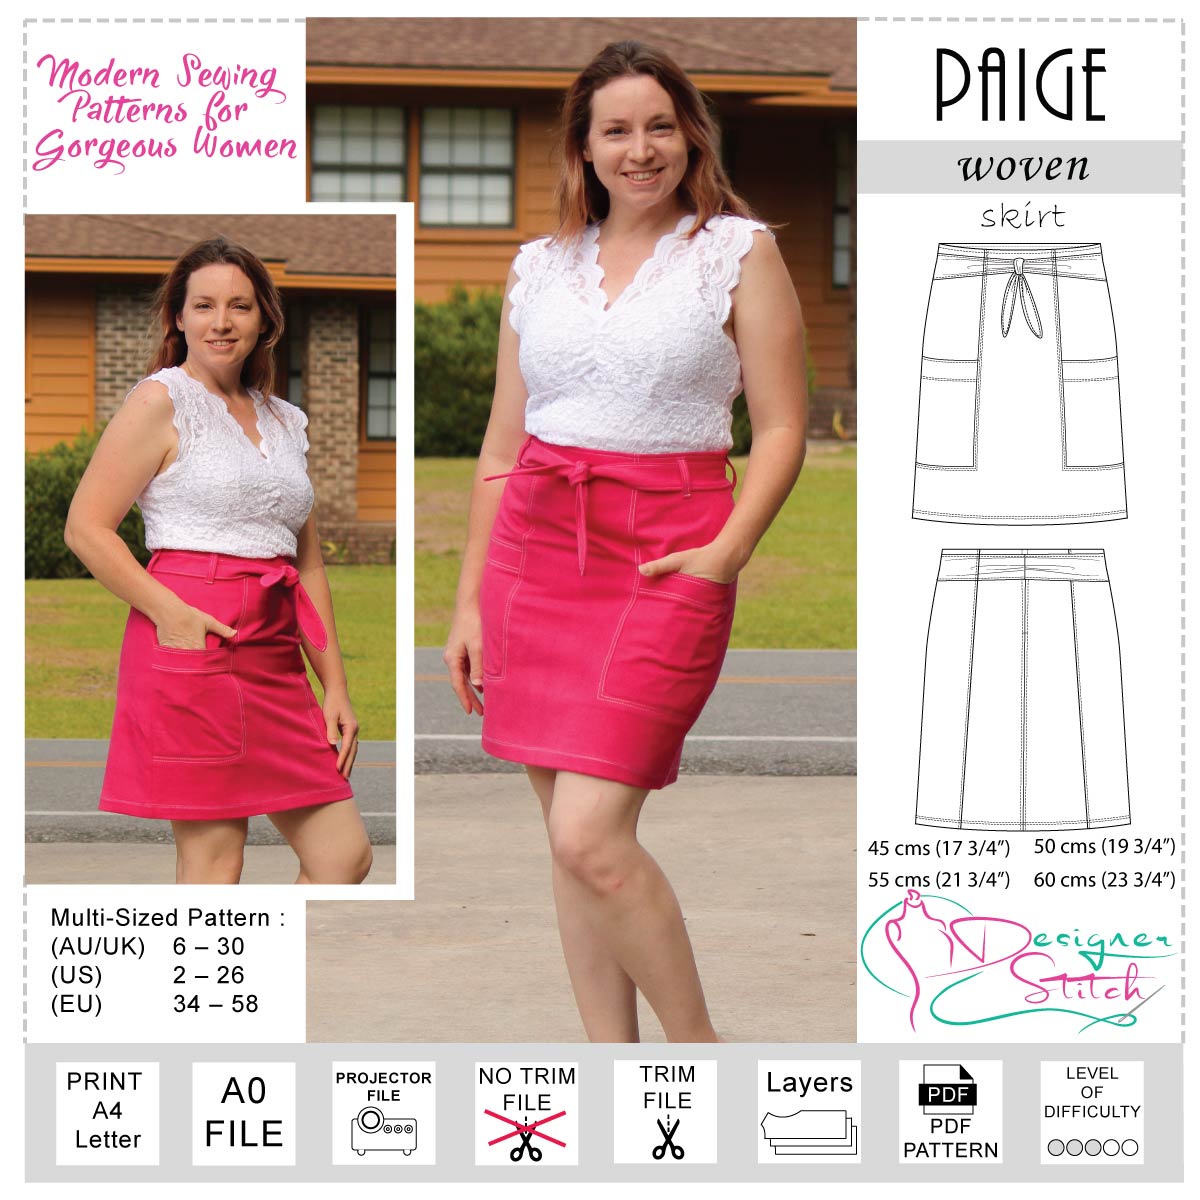 Products Archive - Page 4 of 8 - Designer Stitch